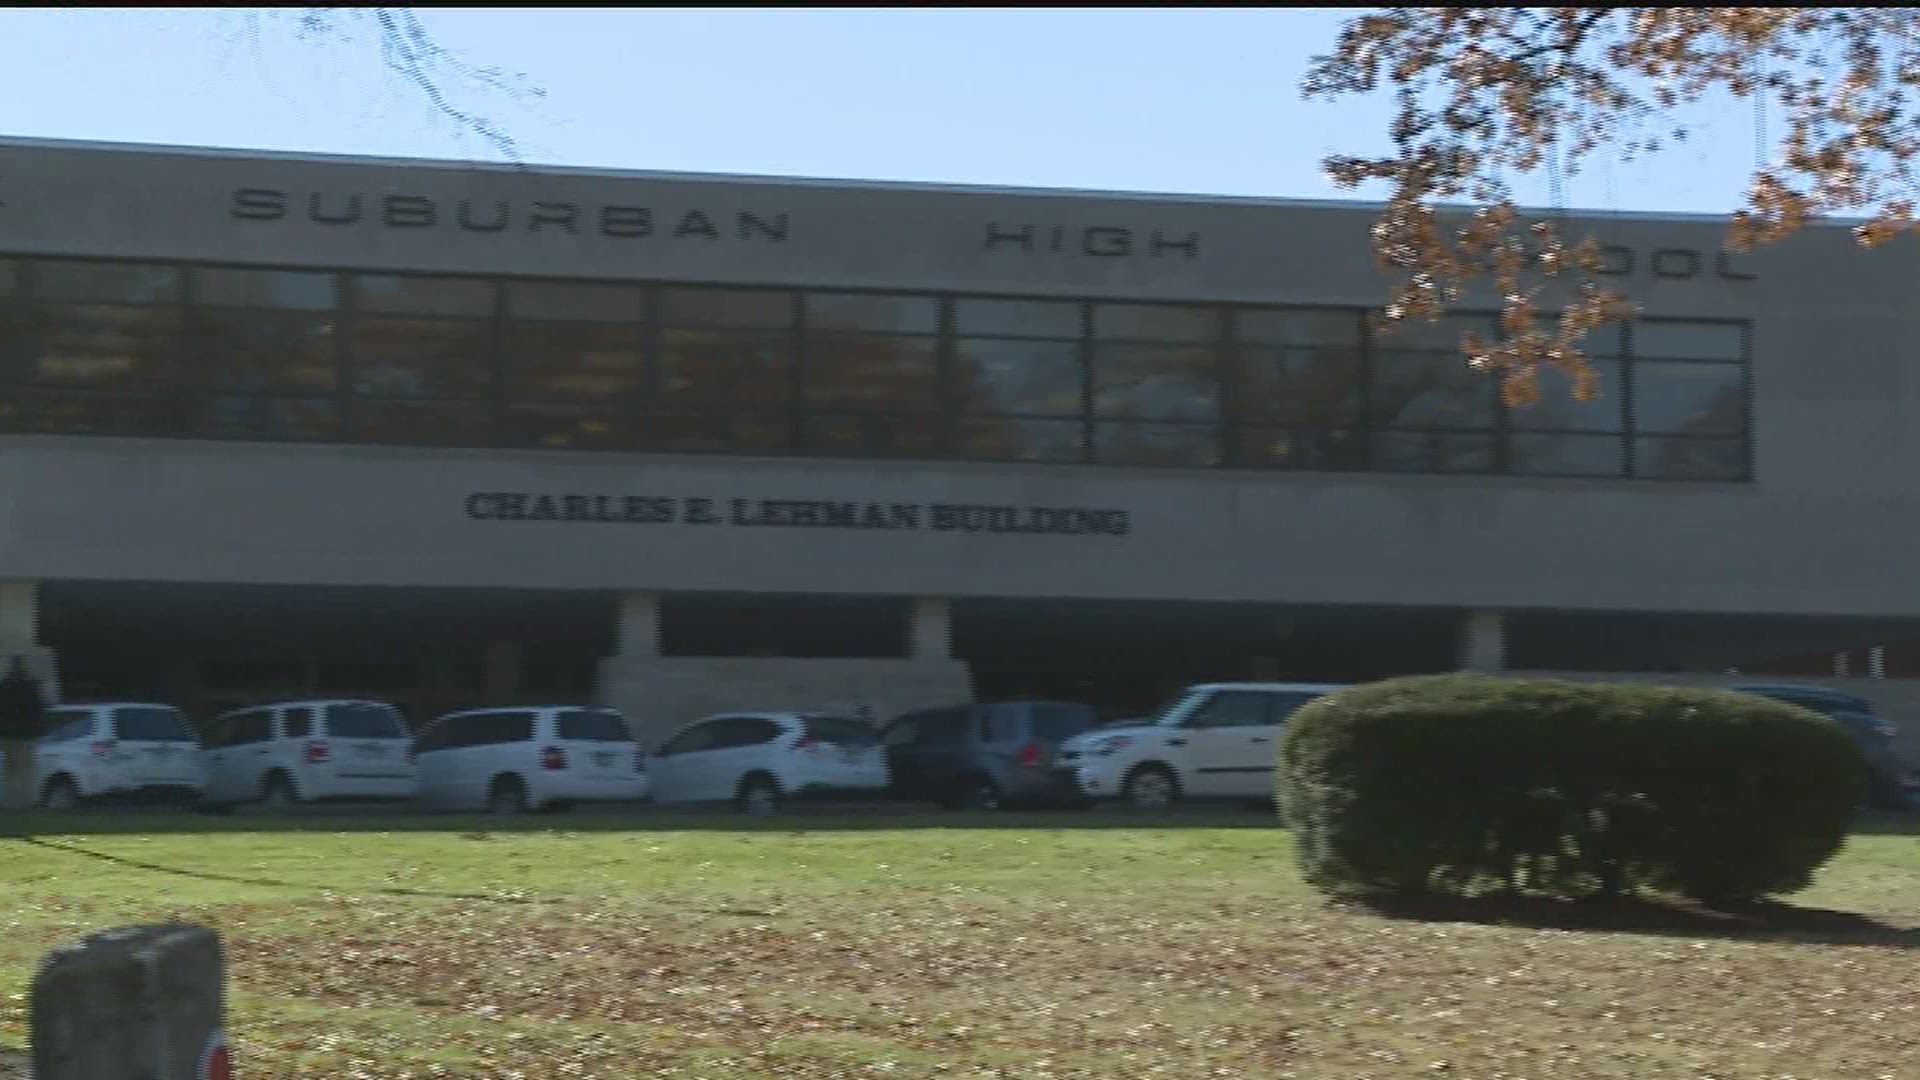 York Suburban School District announced a change in its plans for the coming school year.